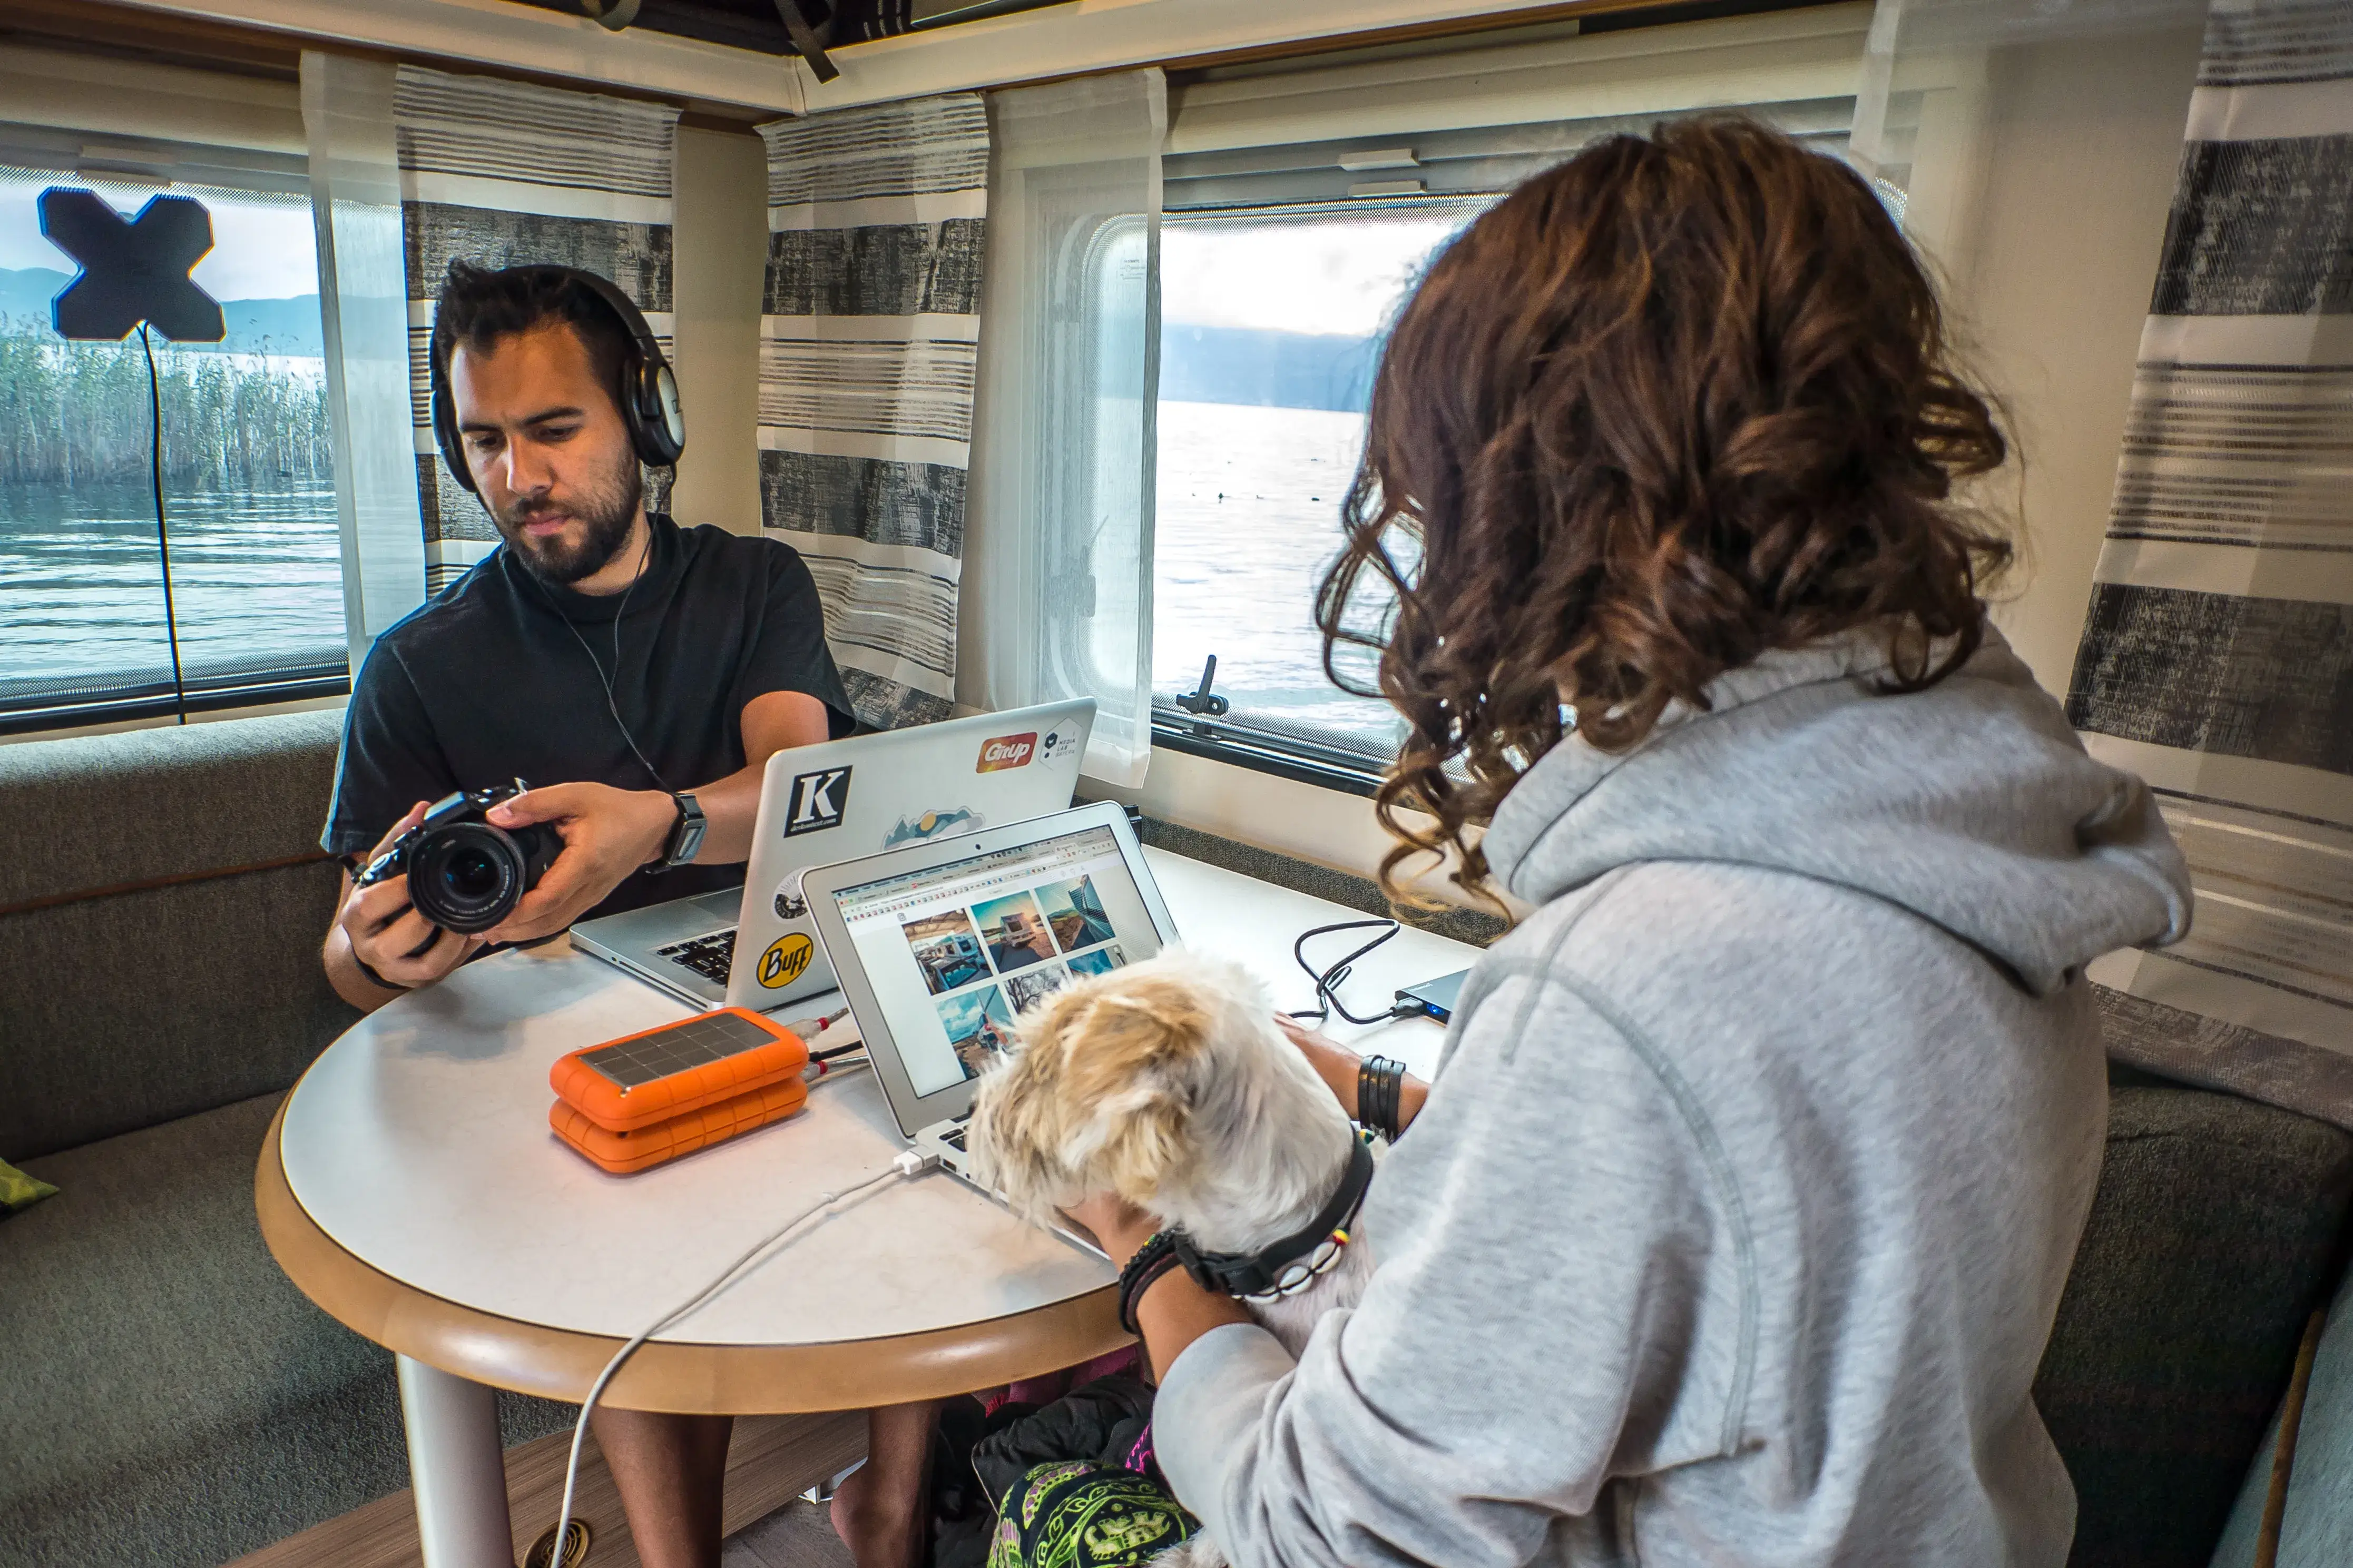 In the camper, creating content.